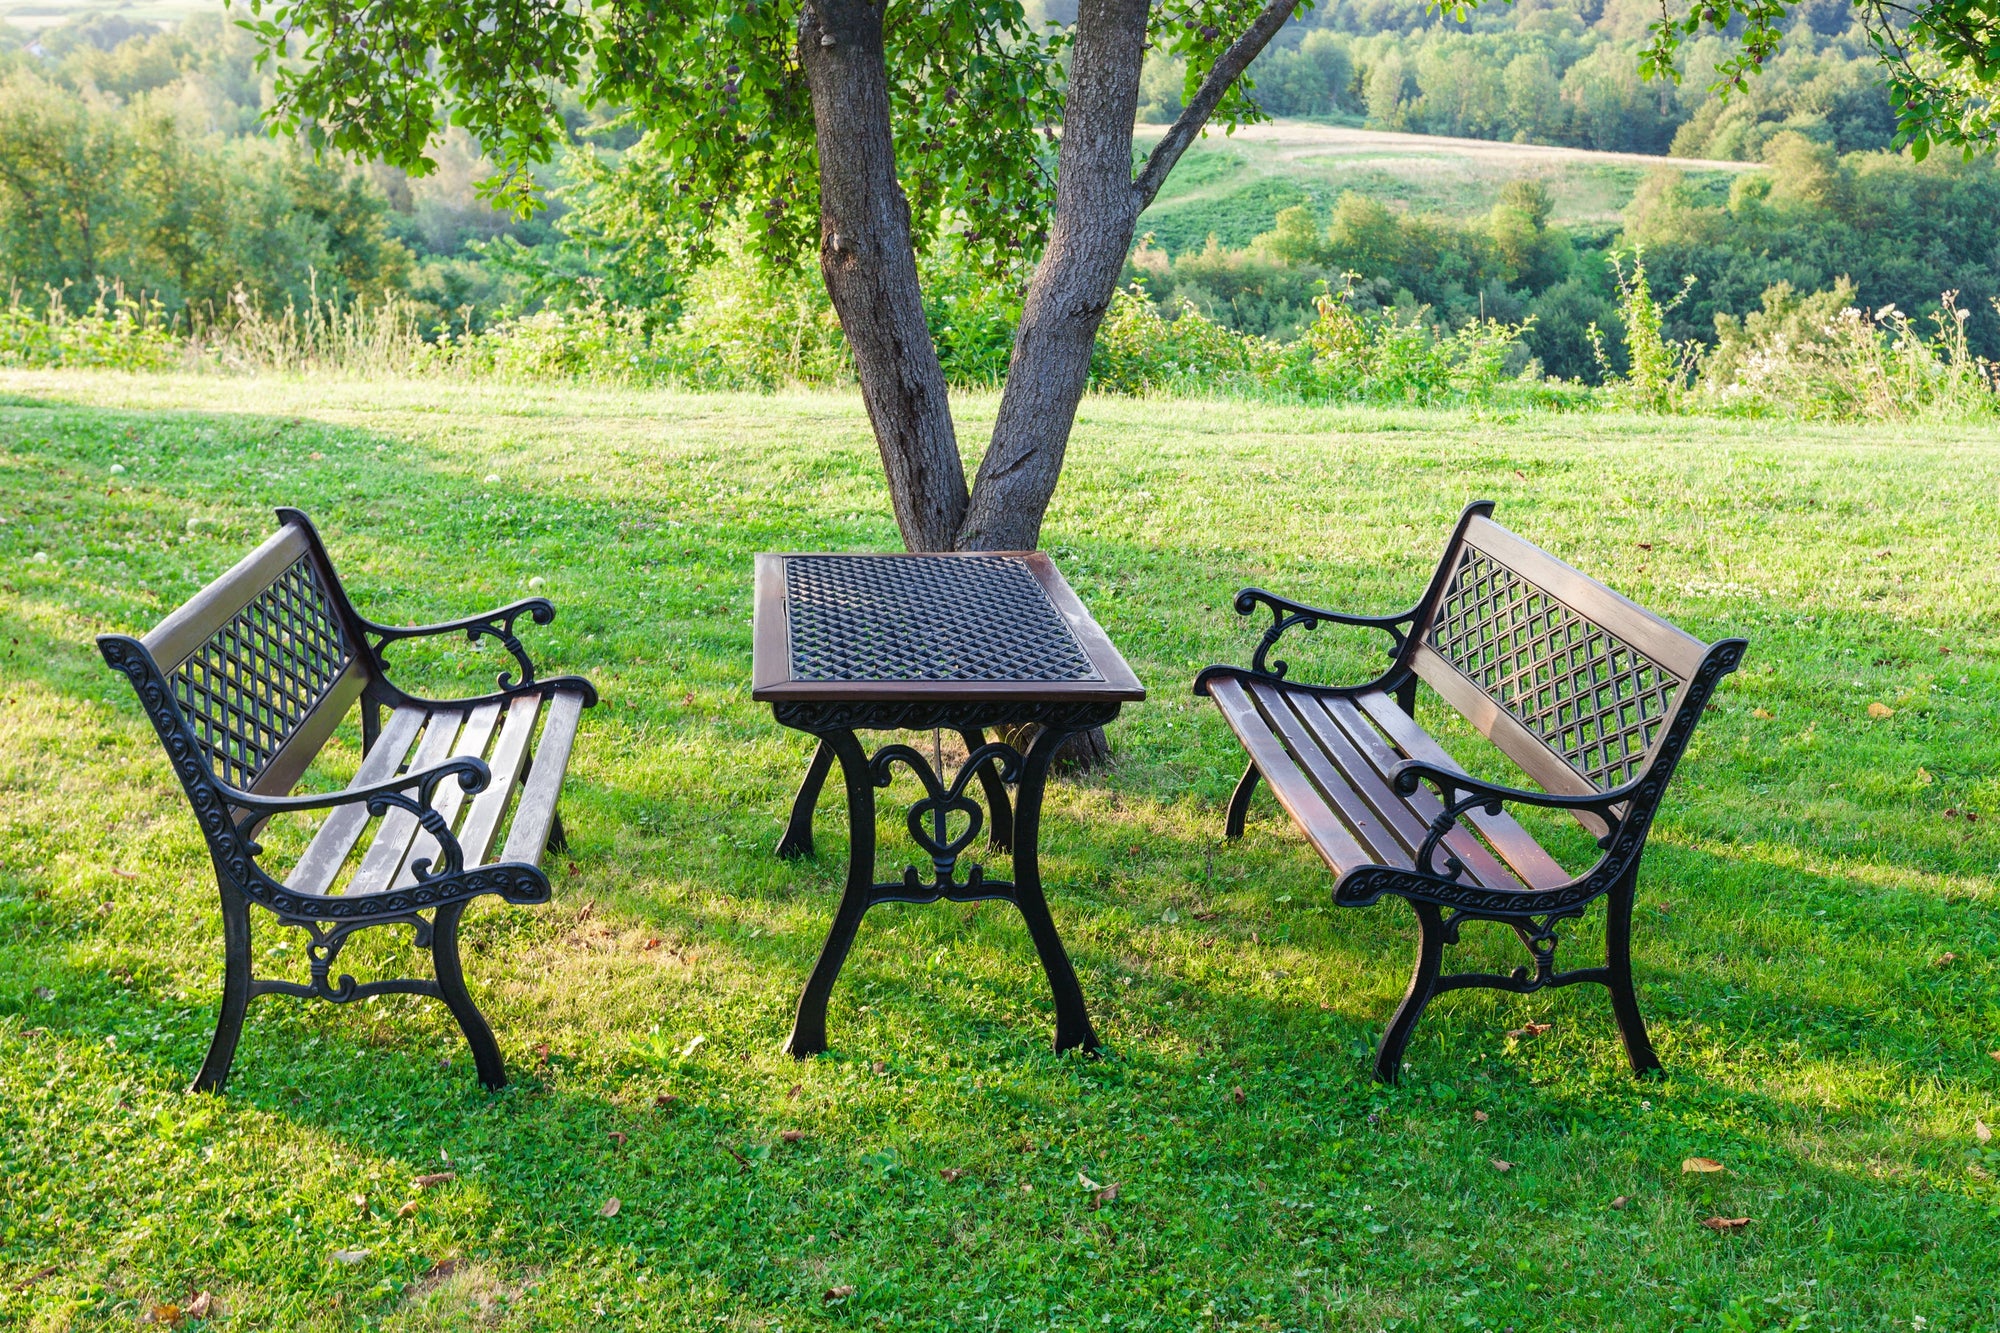 The Best Wood for Outdoor Furniture